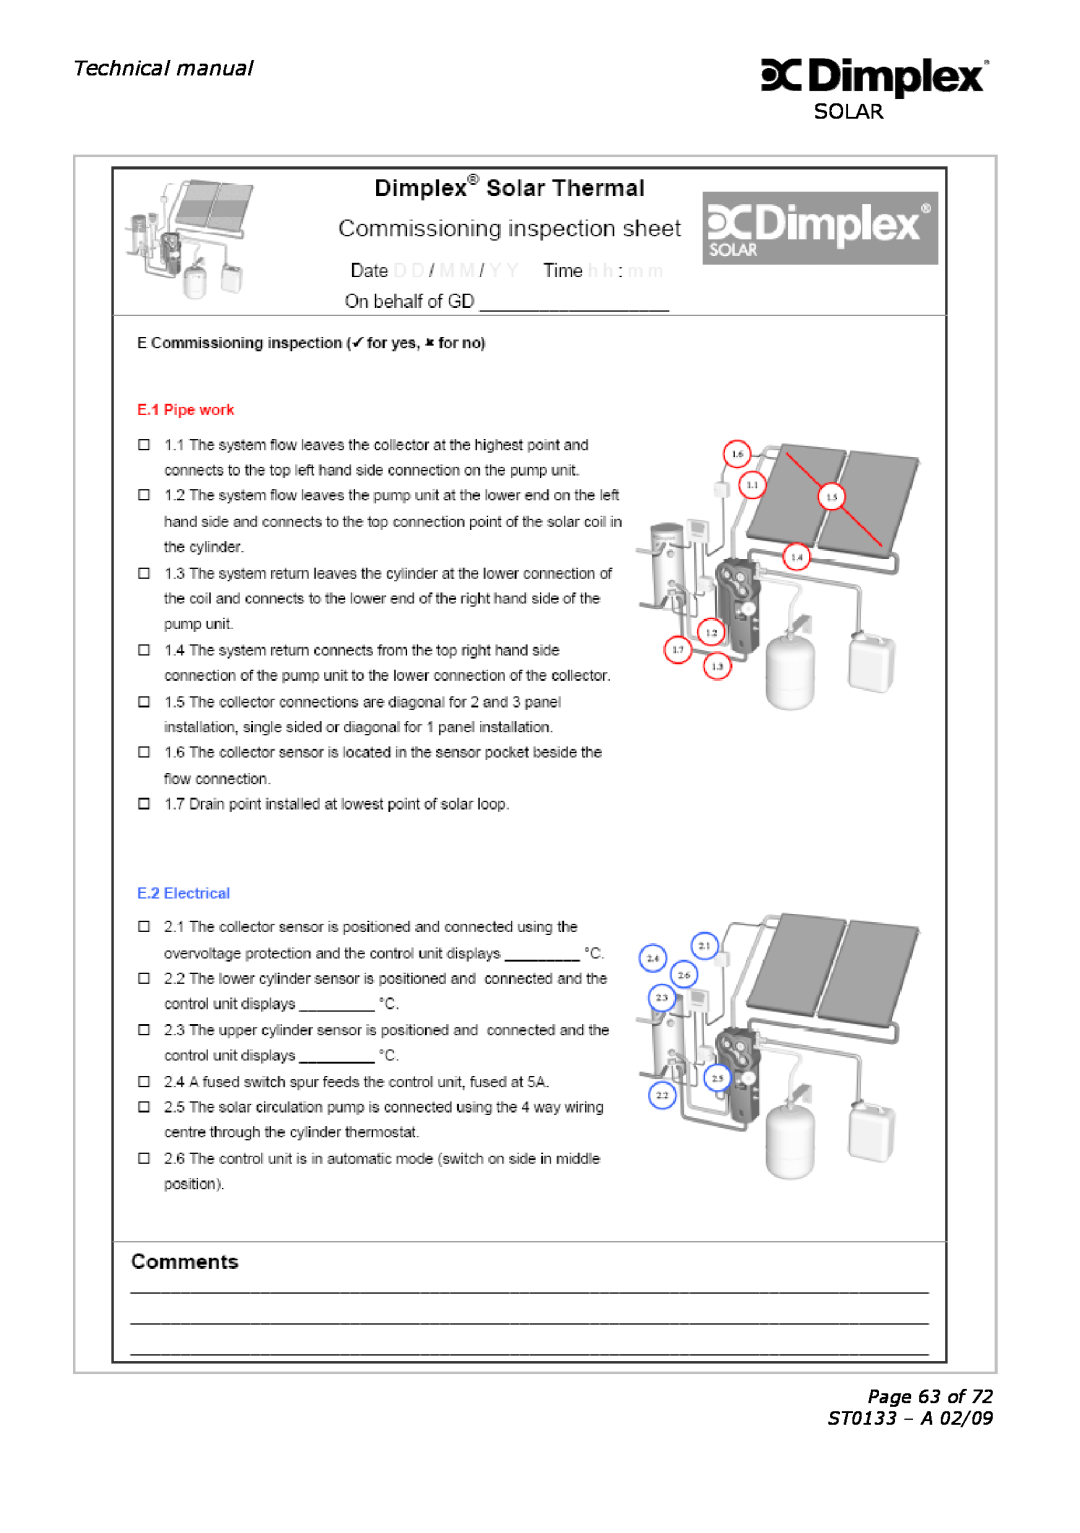 Dimplex technical manual Technical manual, Page 63 of ST0133 - A 02/09 